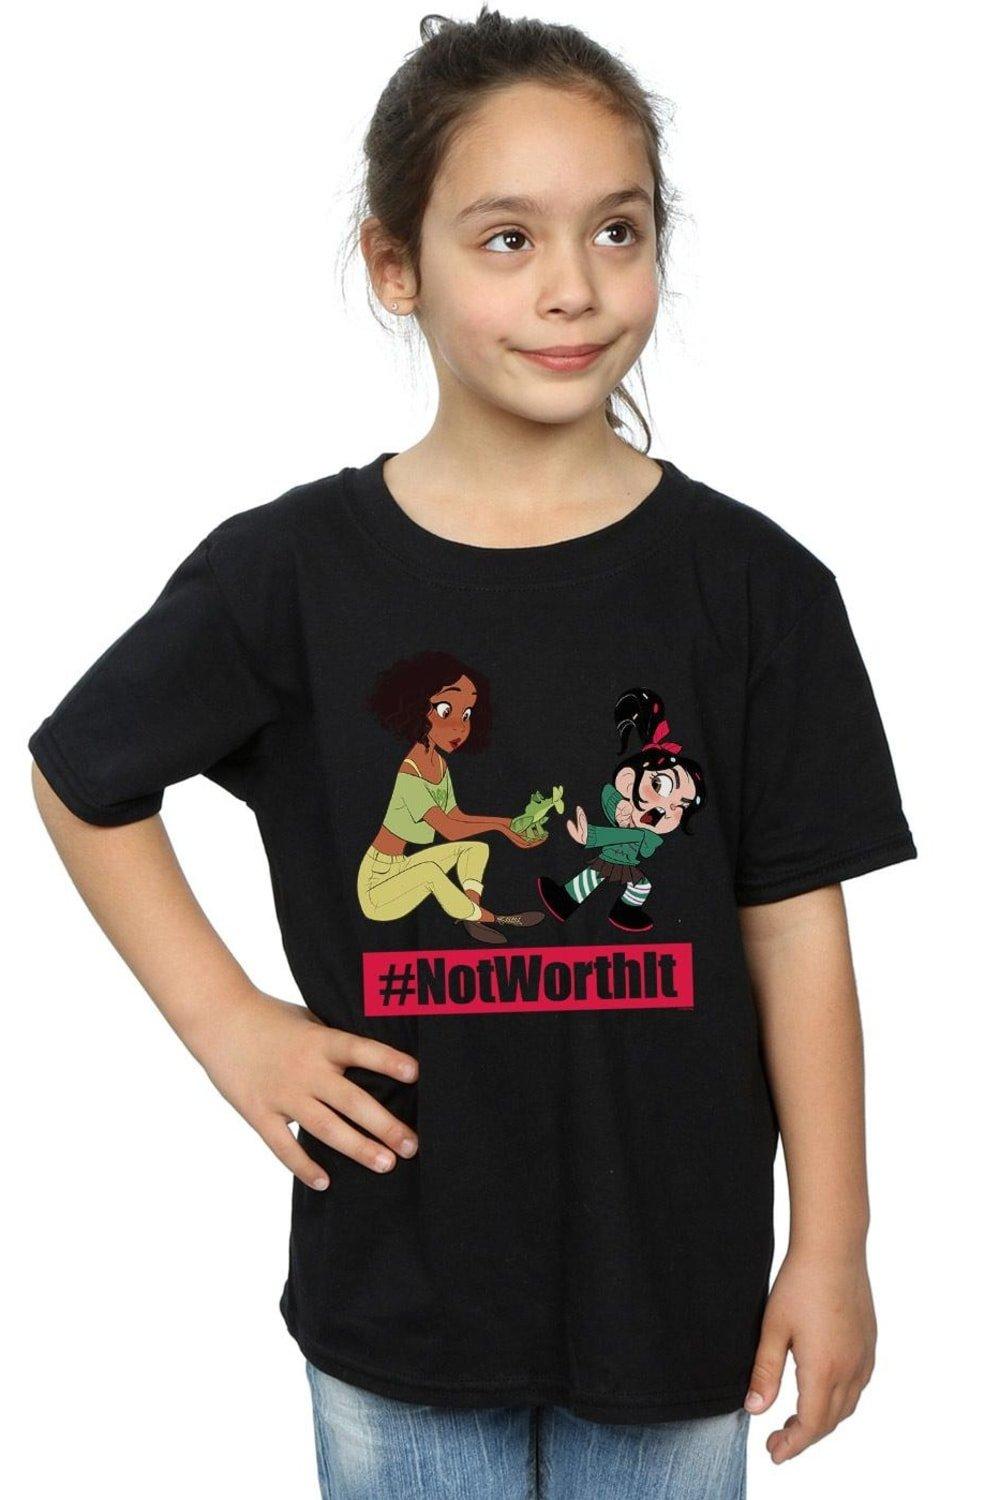 Wreck It Ralph Tiana And Vanellope Cotton T-Shirt